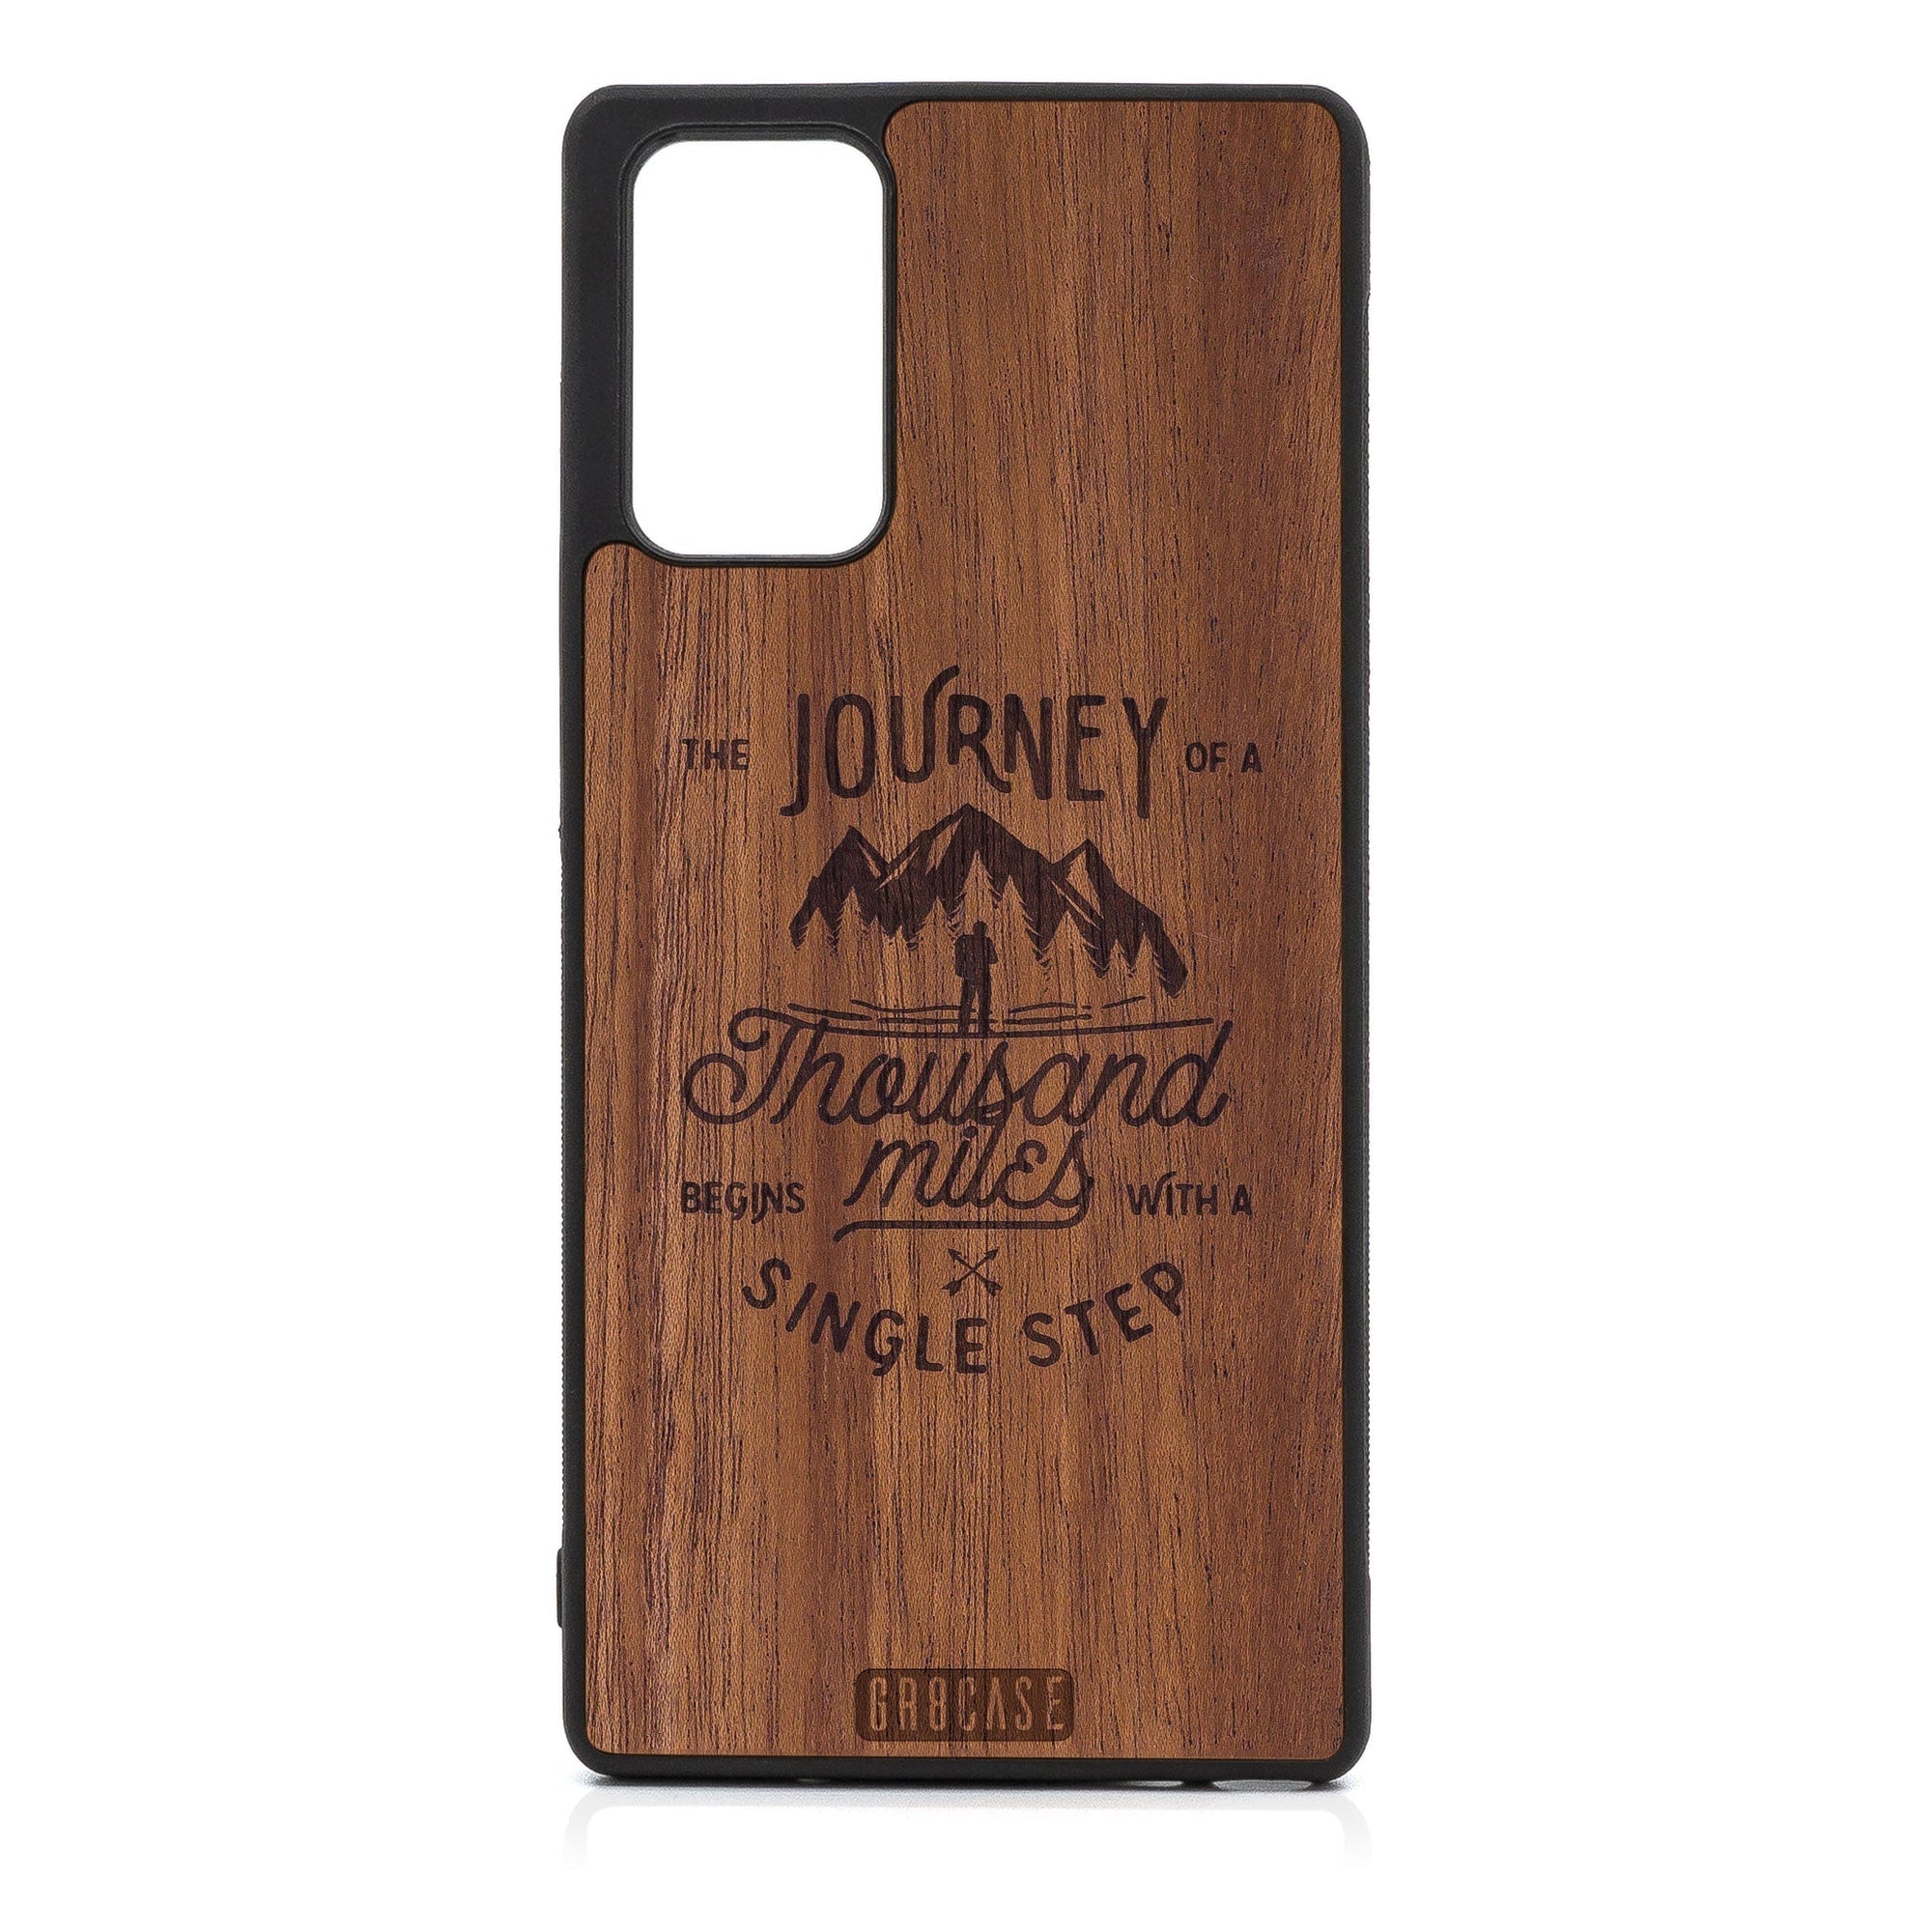 The Journey Of A Thousand Miles Begins With A Single Step Design Wood Case For Samsung Galaxy A33 5G